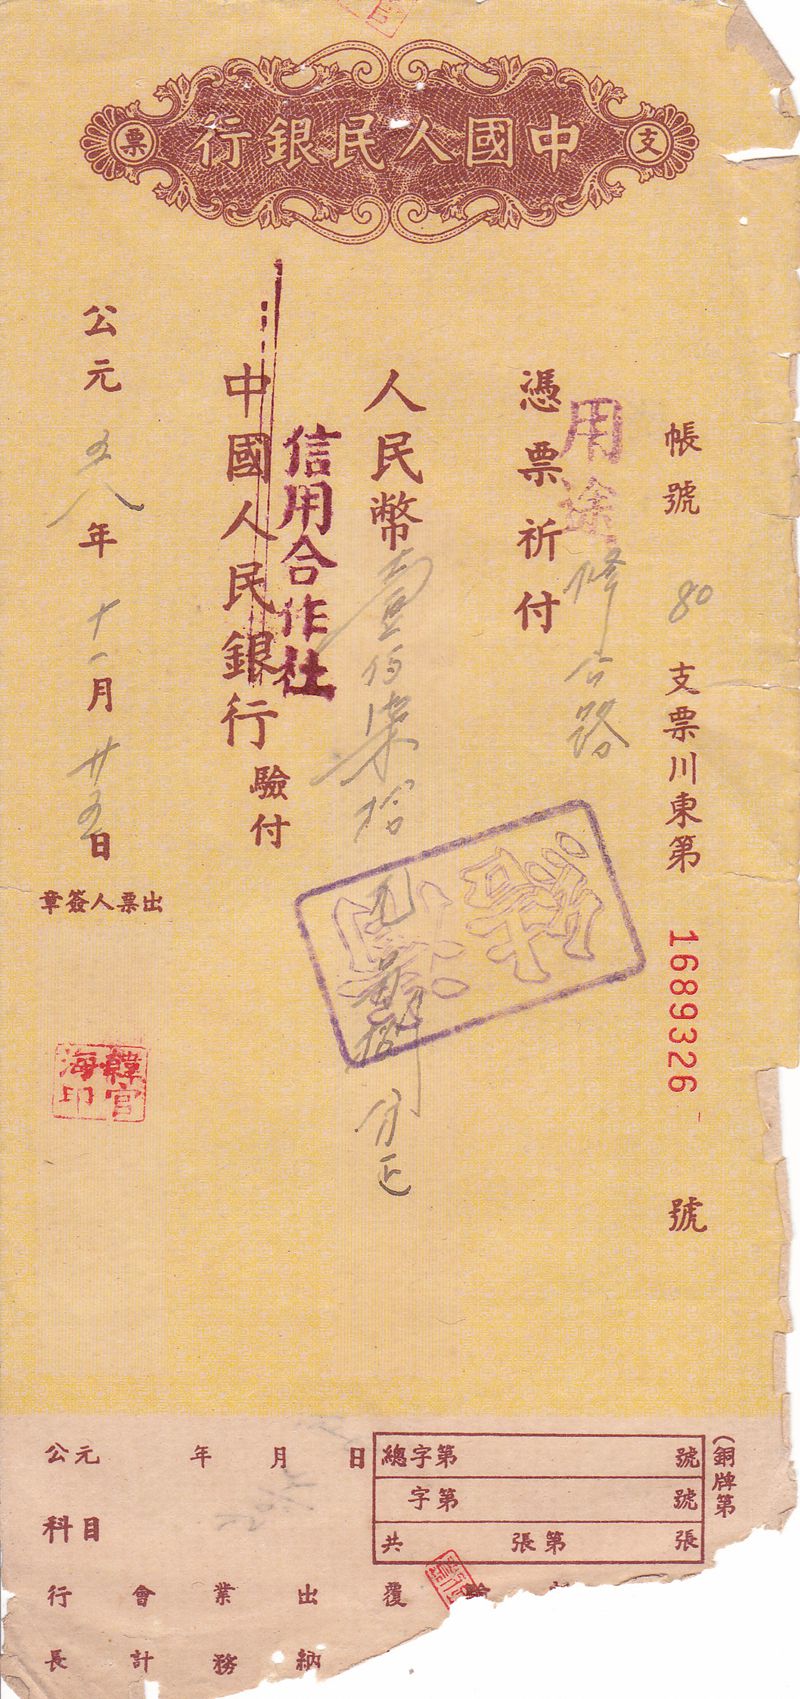 D1108, Checks of Communist People's Bank of China in 1959